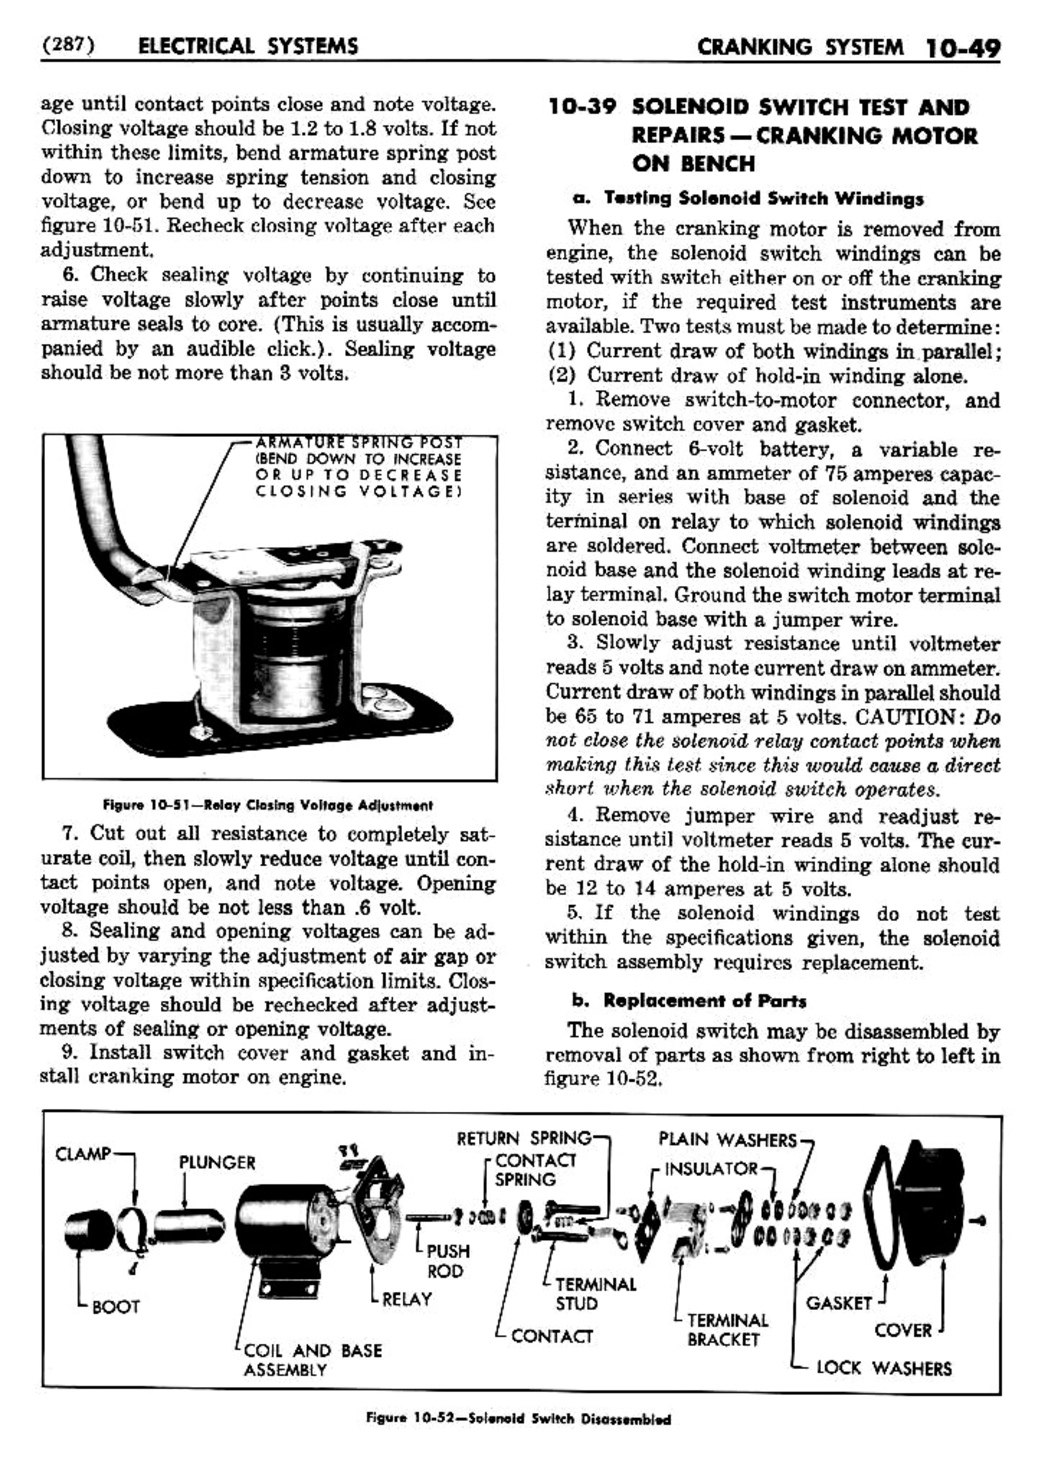 n_11 1950 Buick Shop Manual - Electrical Systems-049-049.jpg